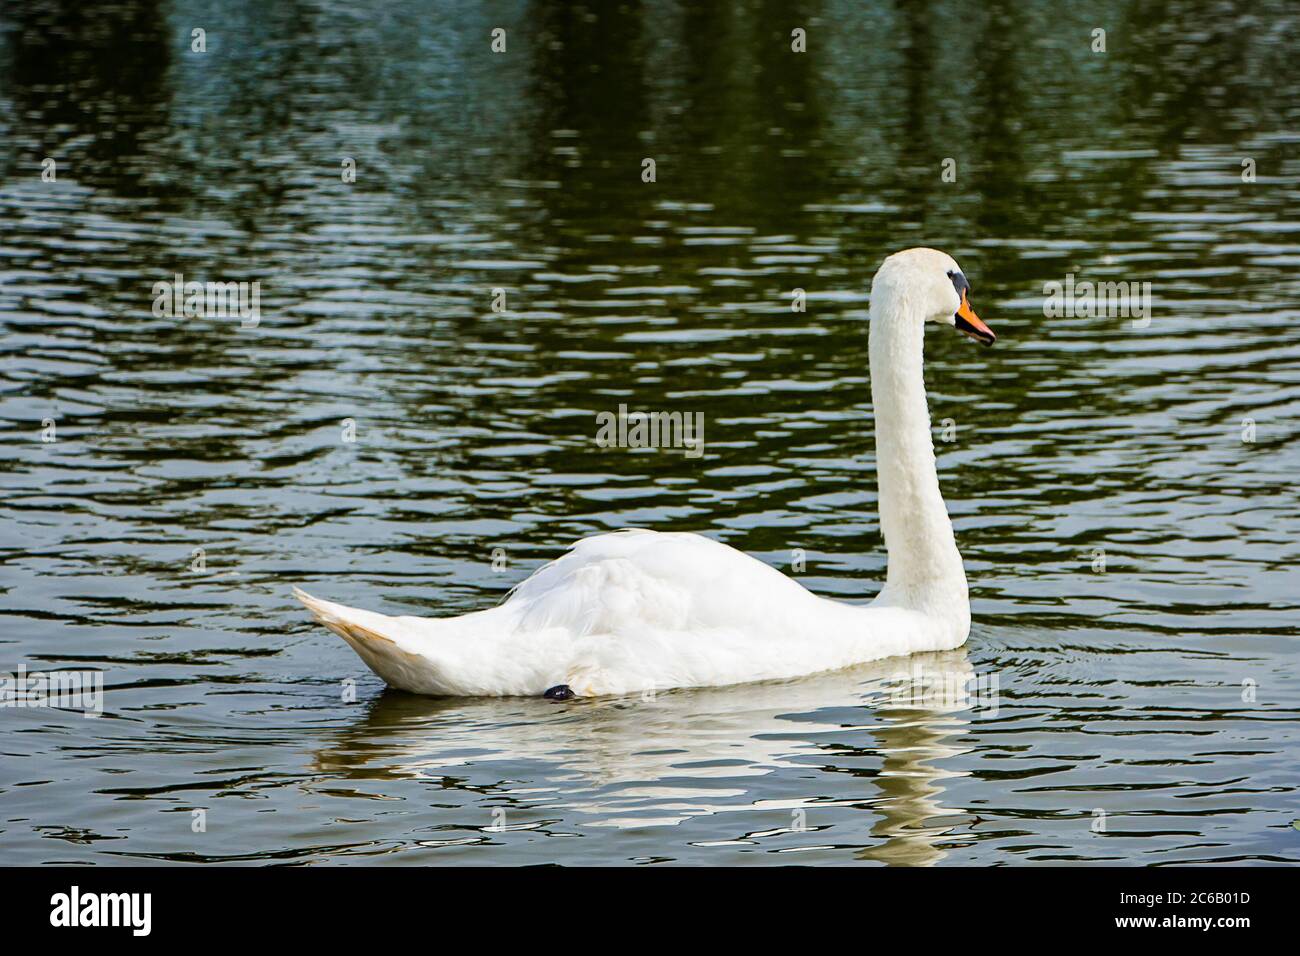 A beautiful white swan swims in a pond in clear water among lotuses. Stock Photo